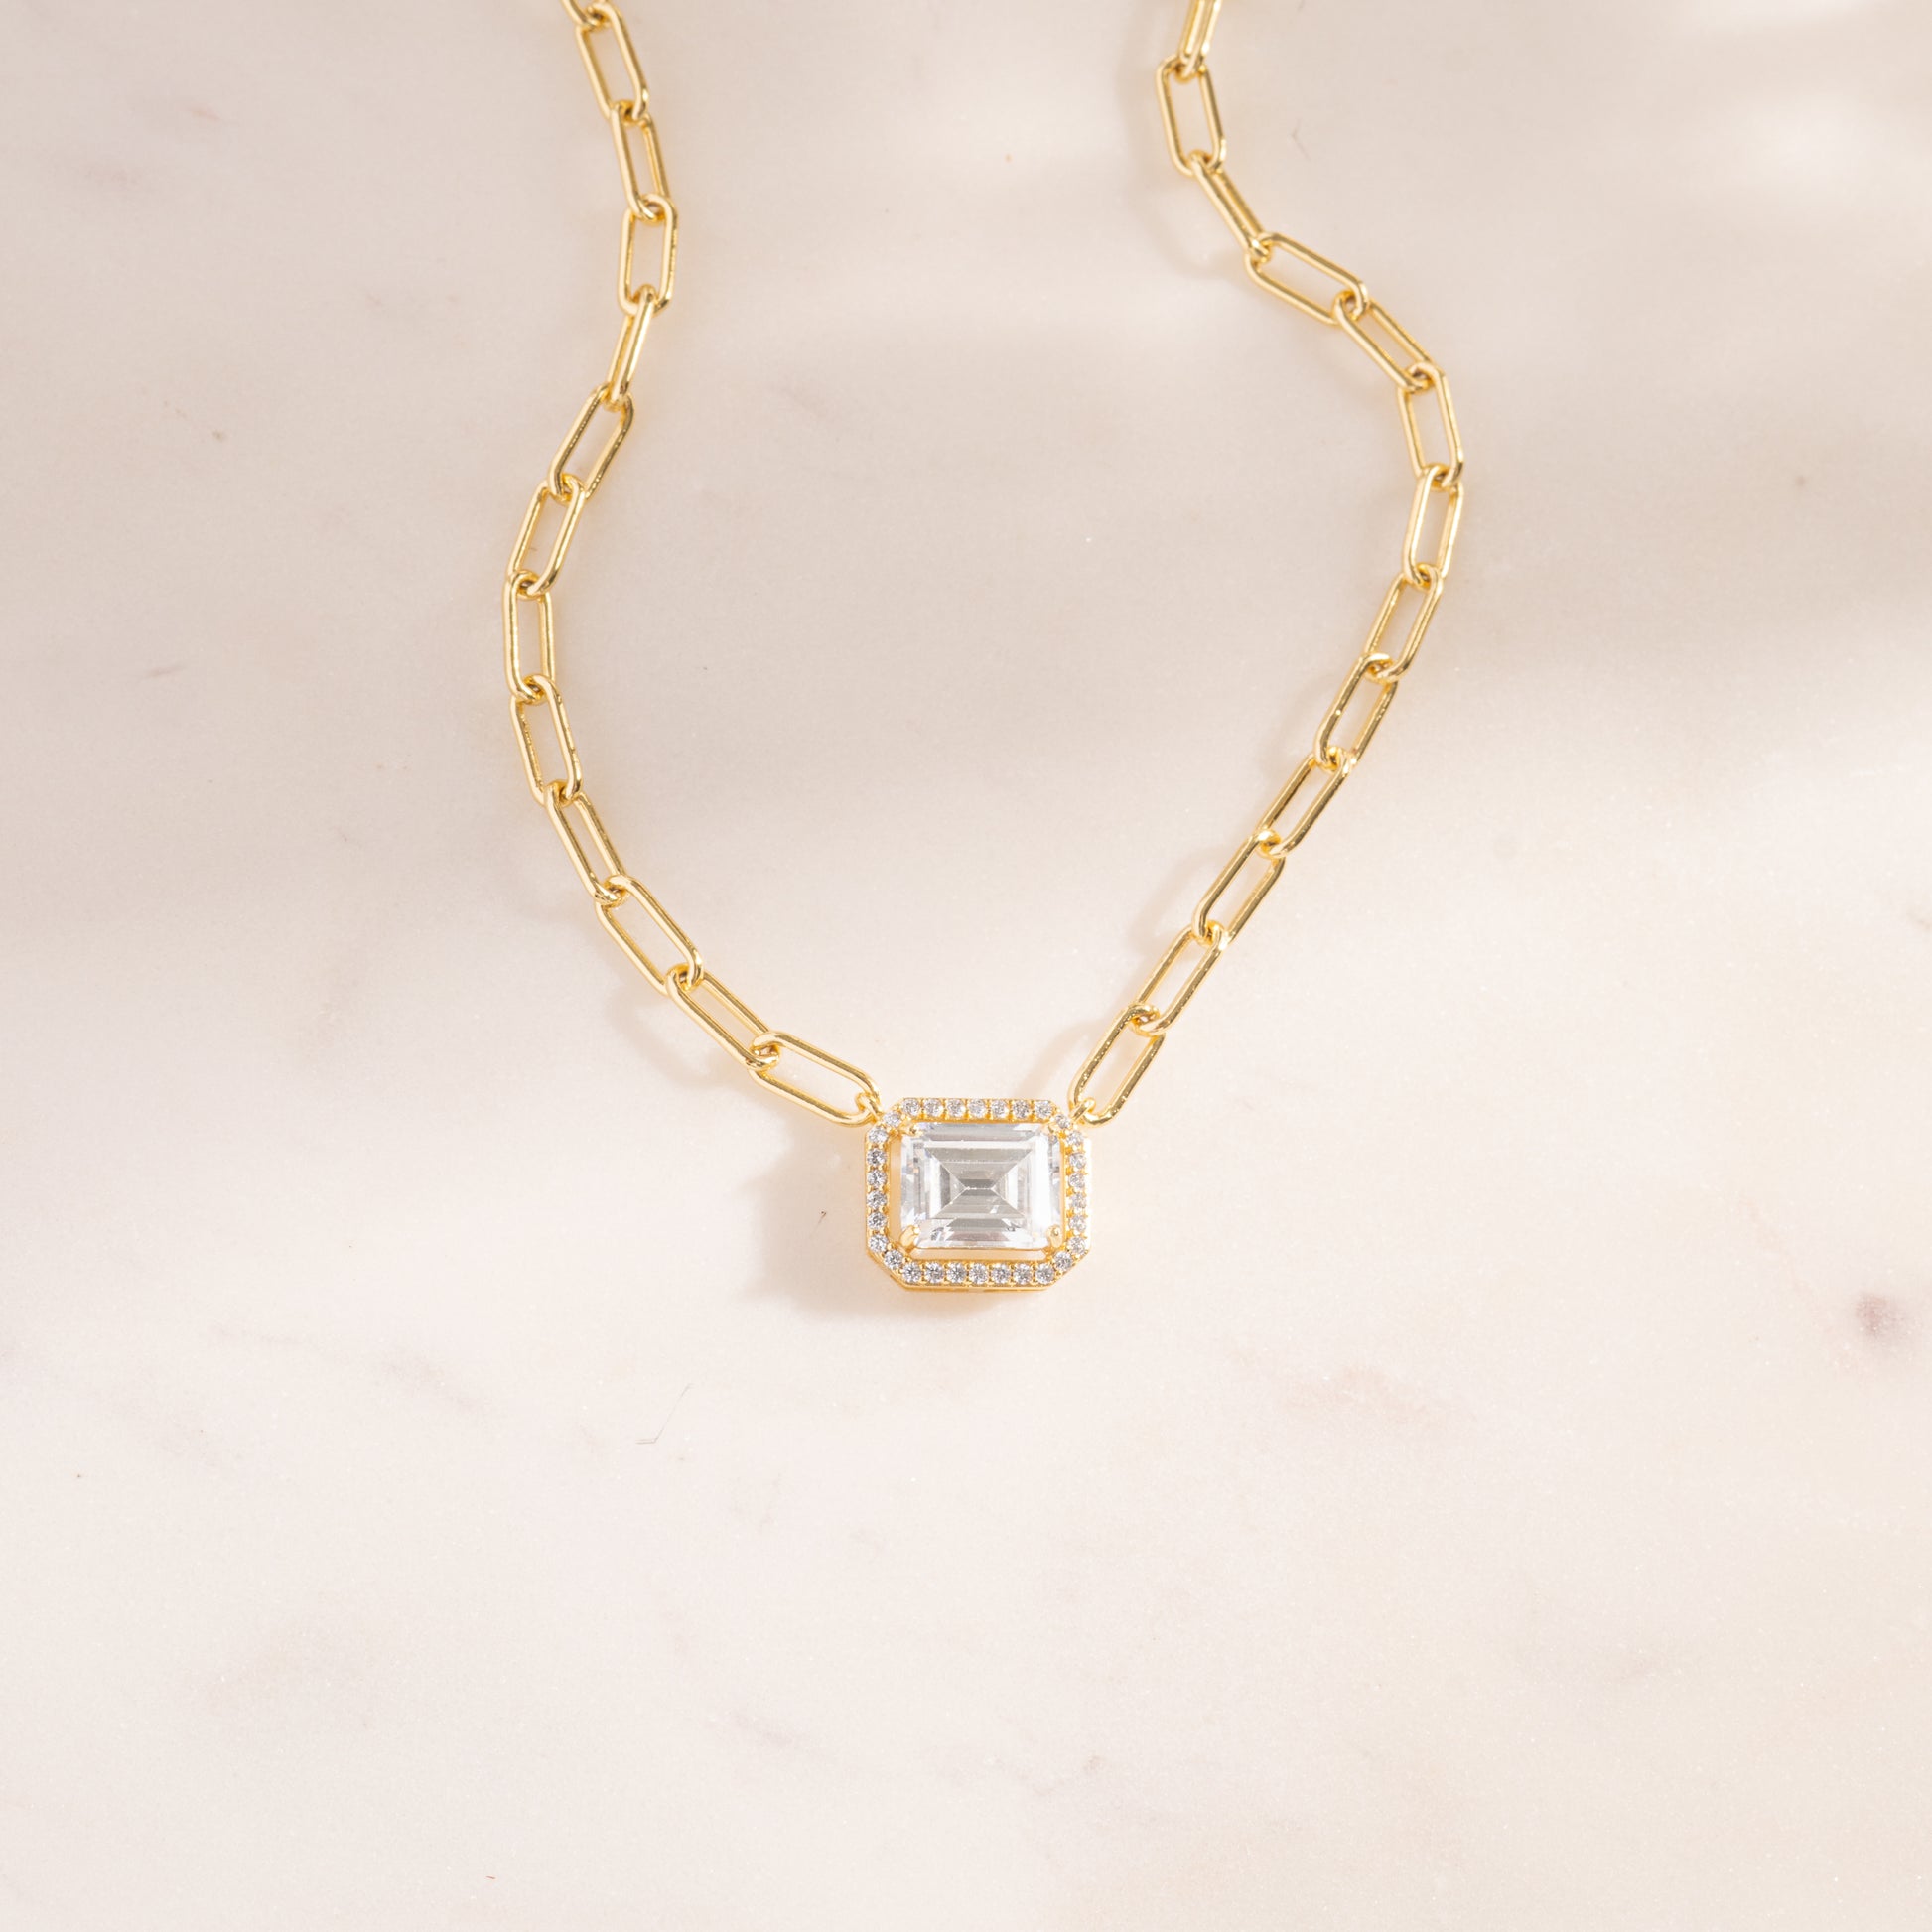 a gold necklace with a square cut stone on a chain